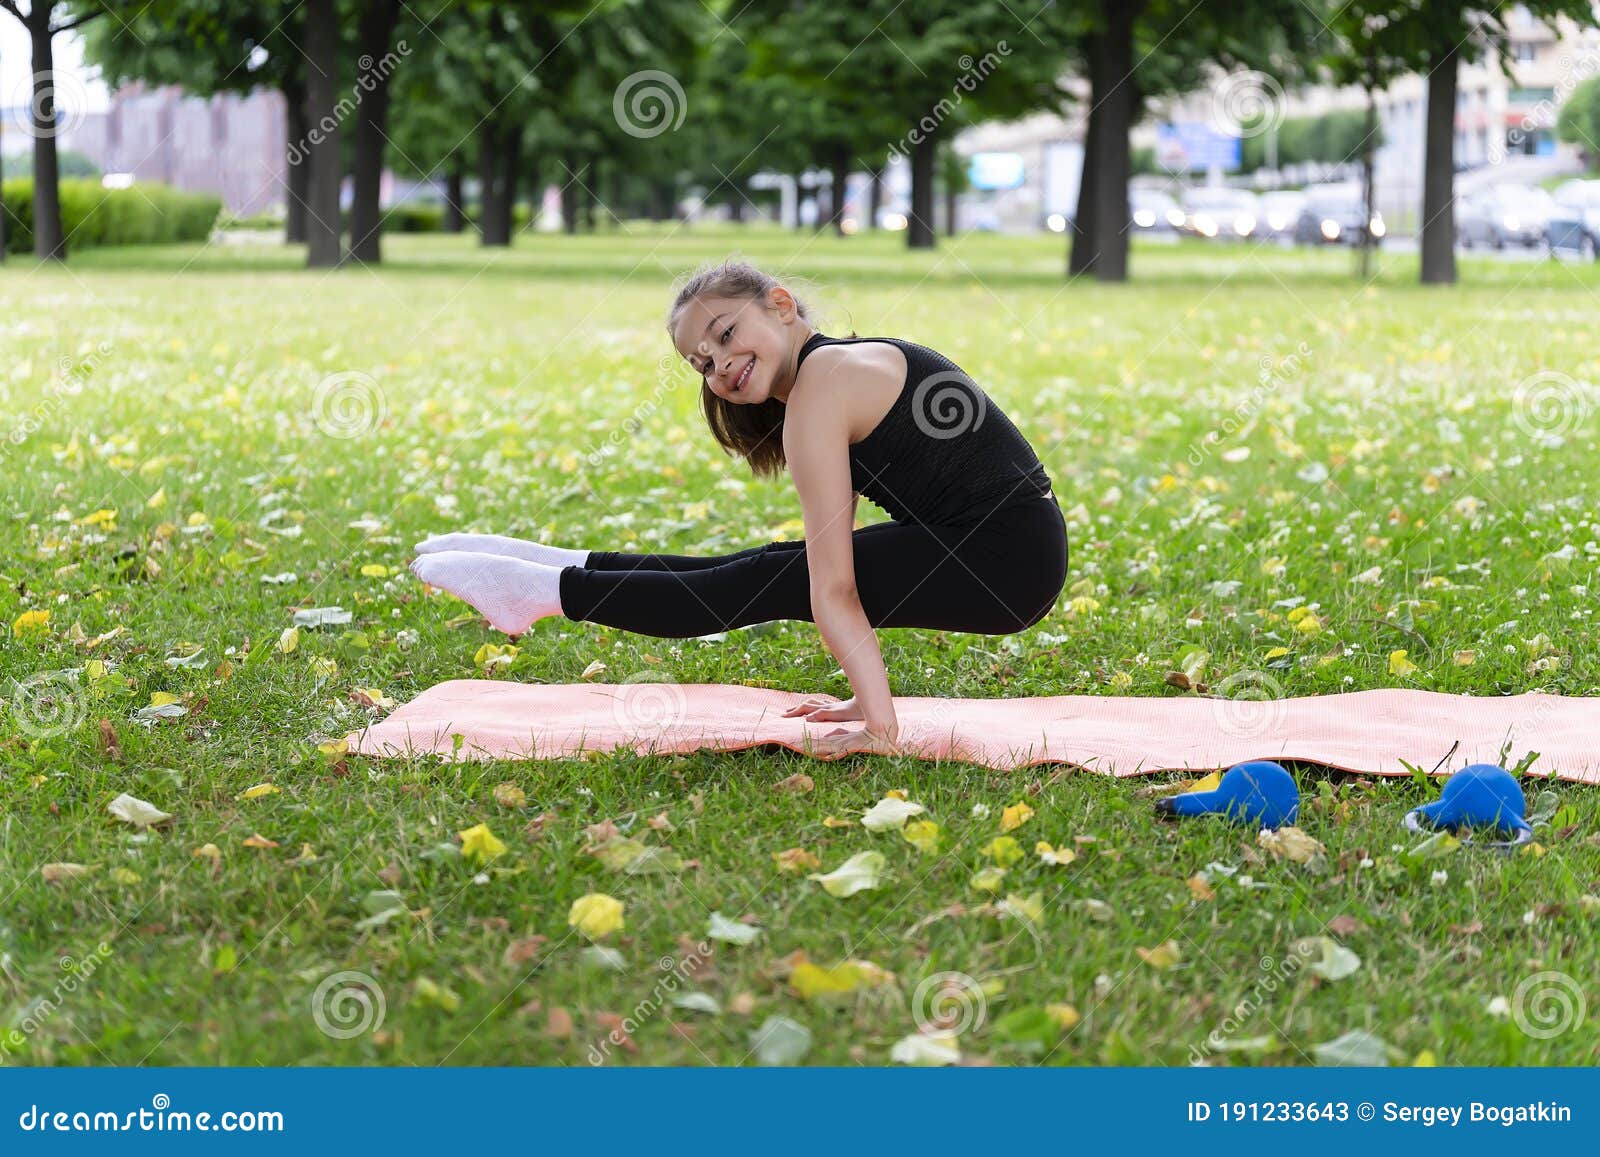 A Girl of School Age Doing Gymnastics in a Park on the Grass Stock ...